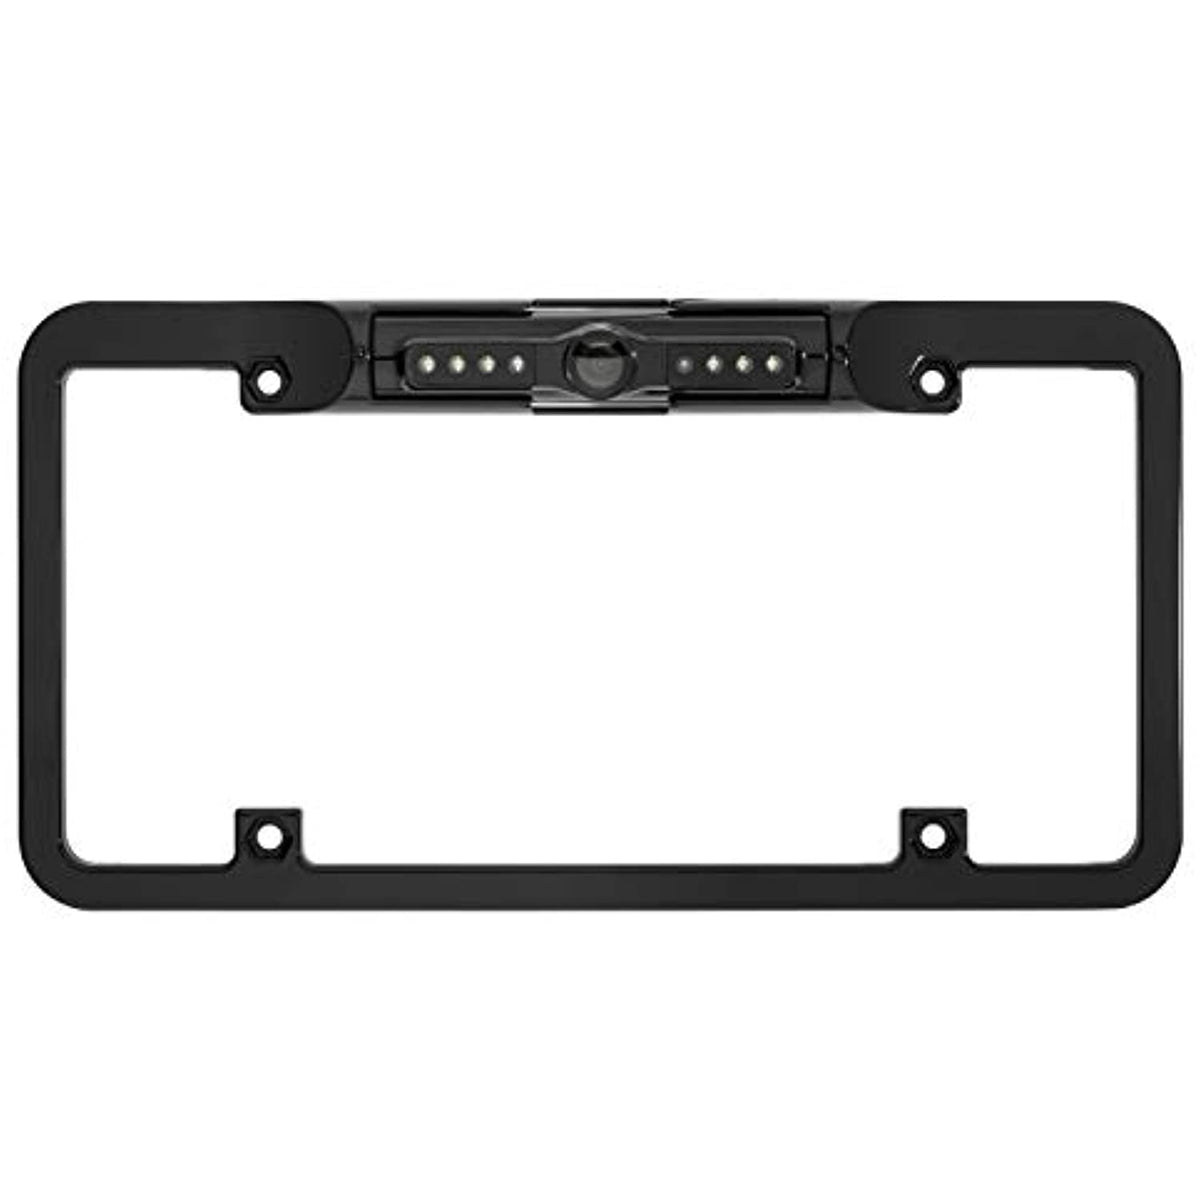 BOYO VTL300IRTJ - Full-Frame License Plate Backup Camera with Night Vision and Active Parking Lines (Black)